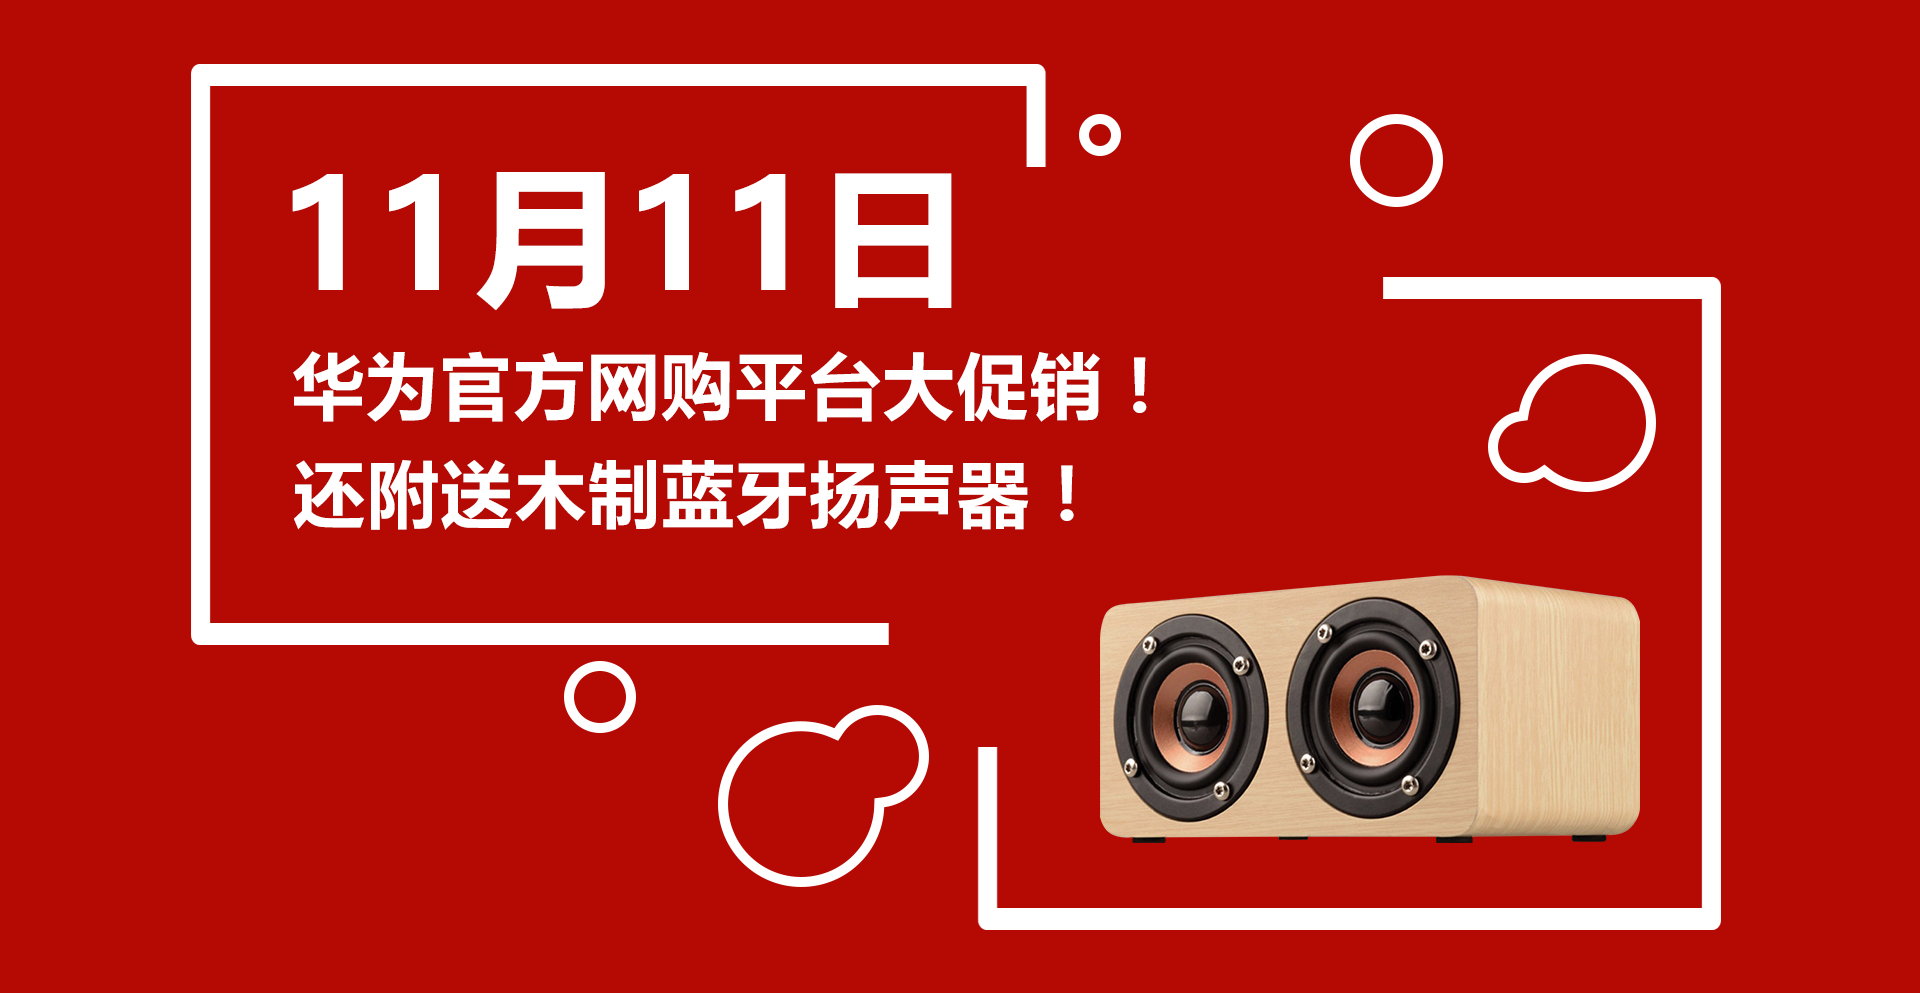 Huawei Online Store Double 11 